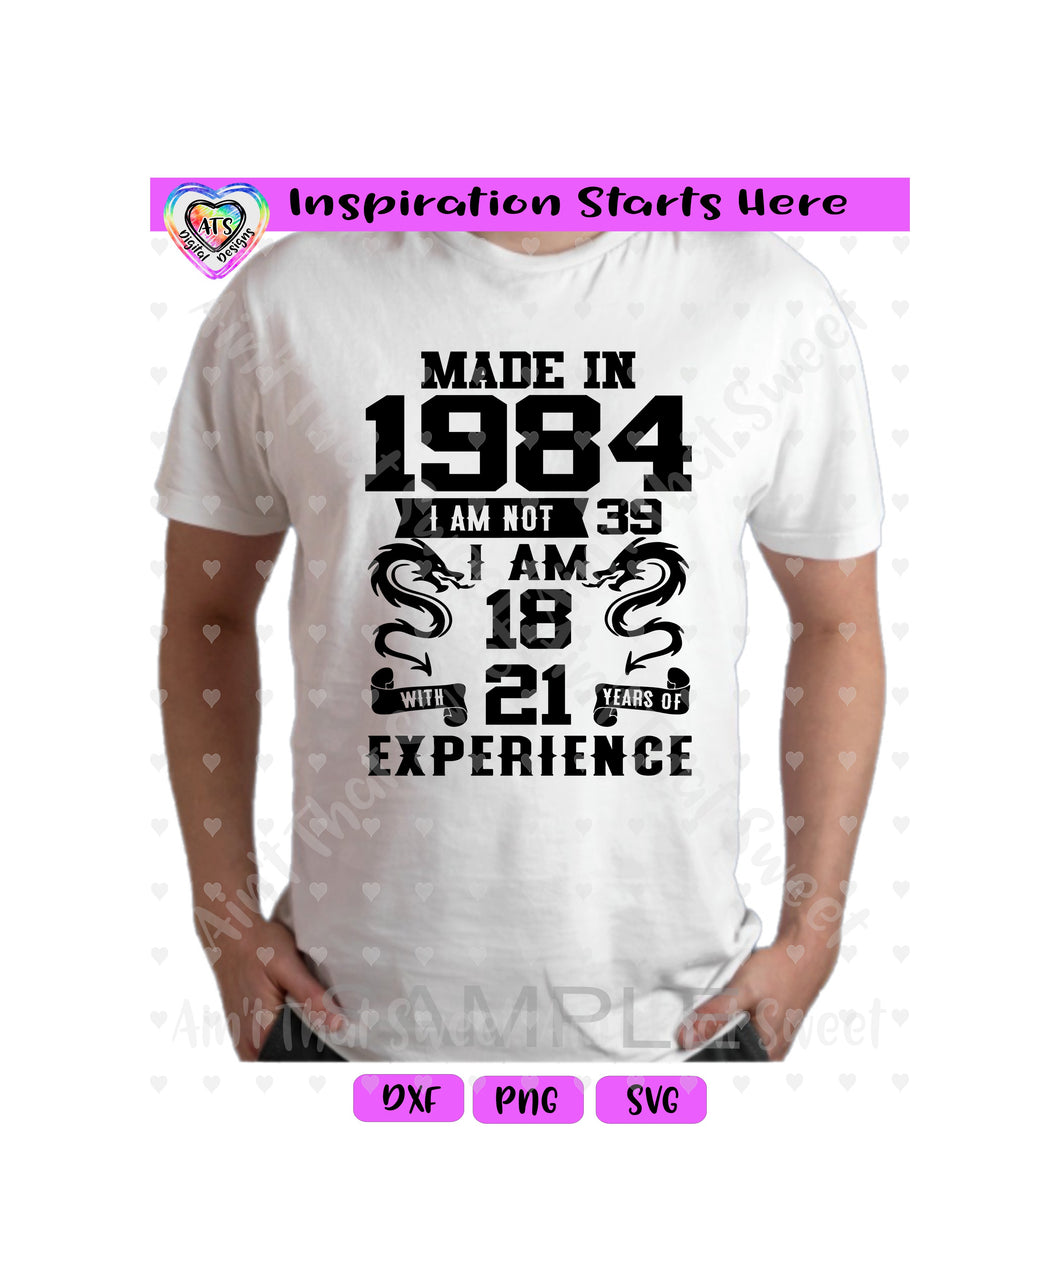 Made in 1984 | I am not 39 I am 18 With 21 Years Experience | Banners | Serpents | Scrolls  (Based on 2023) - Transparent PNG, SVG, DXF  - Silhouette, Cricut, Scan N Cut